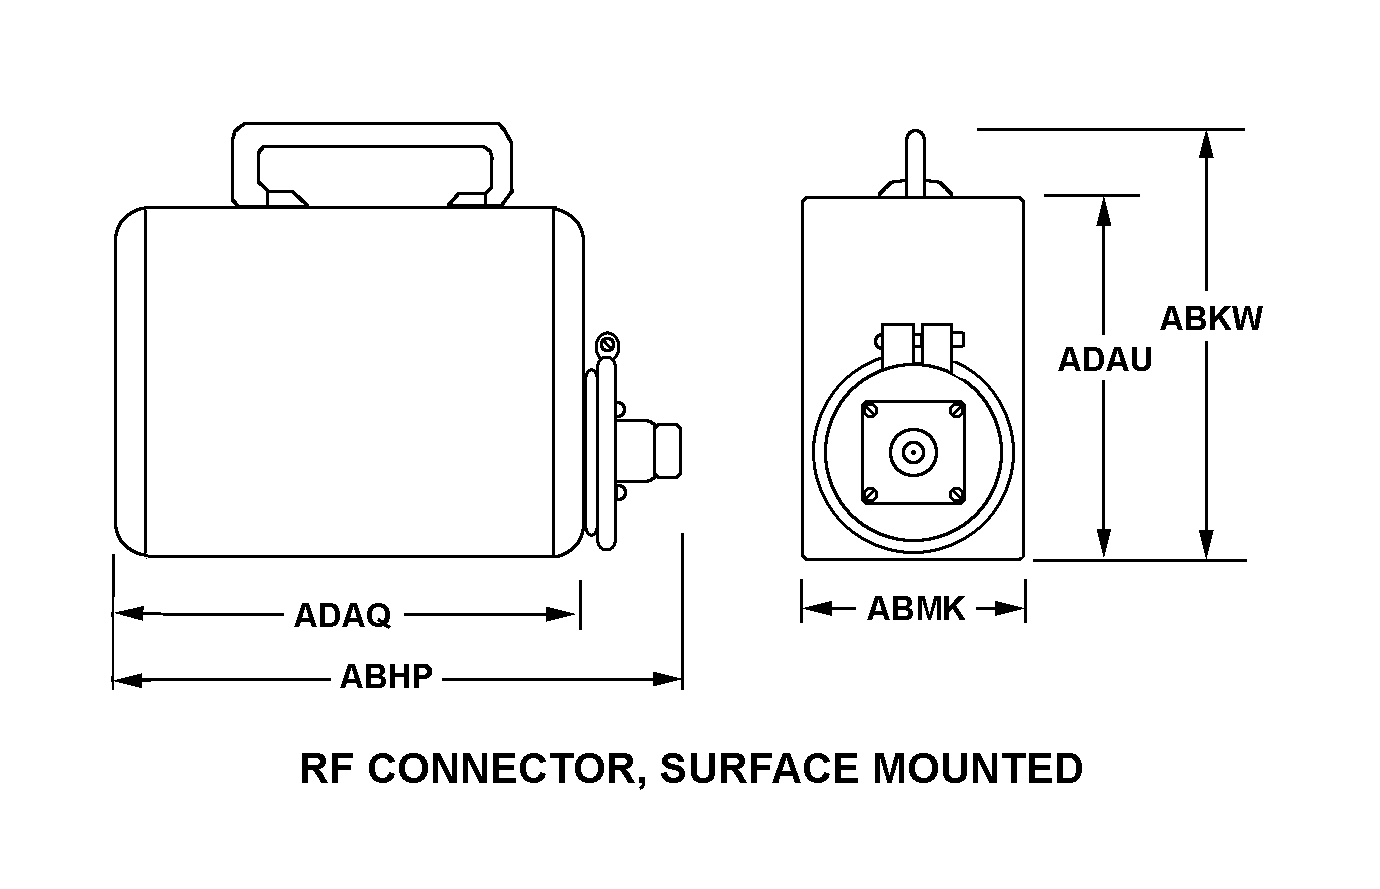 RF CONNECTOR, SURFACE MOUNTED style nsn 5985-01-214-5296